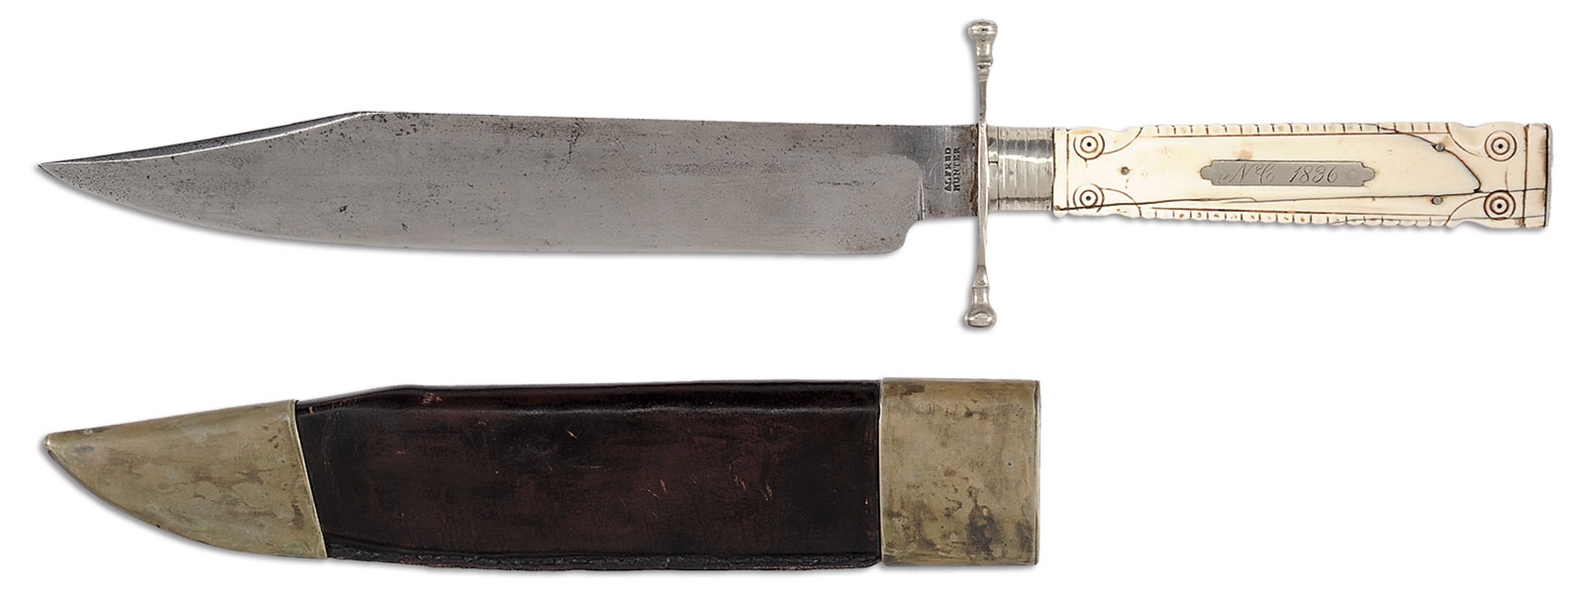 IVORY - RARE ALFRED HUNTER IVORY HANDLED BOWIE KNIFE DATED 1836.                                                                                                                                        